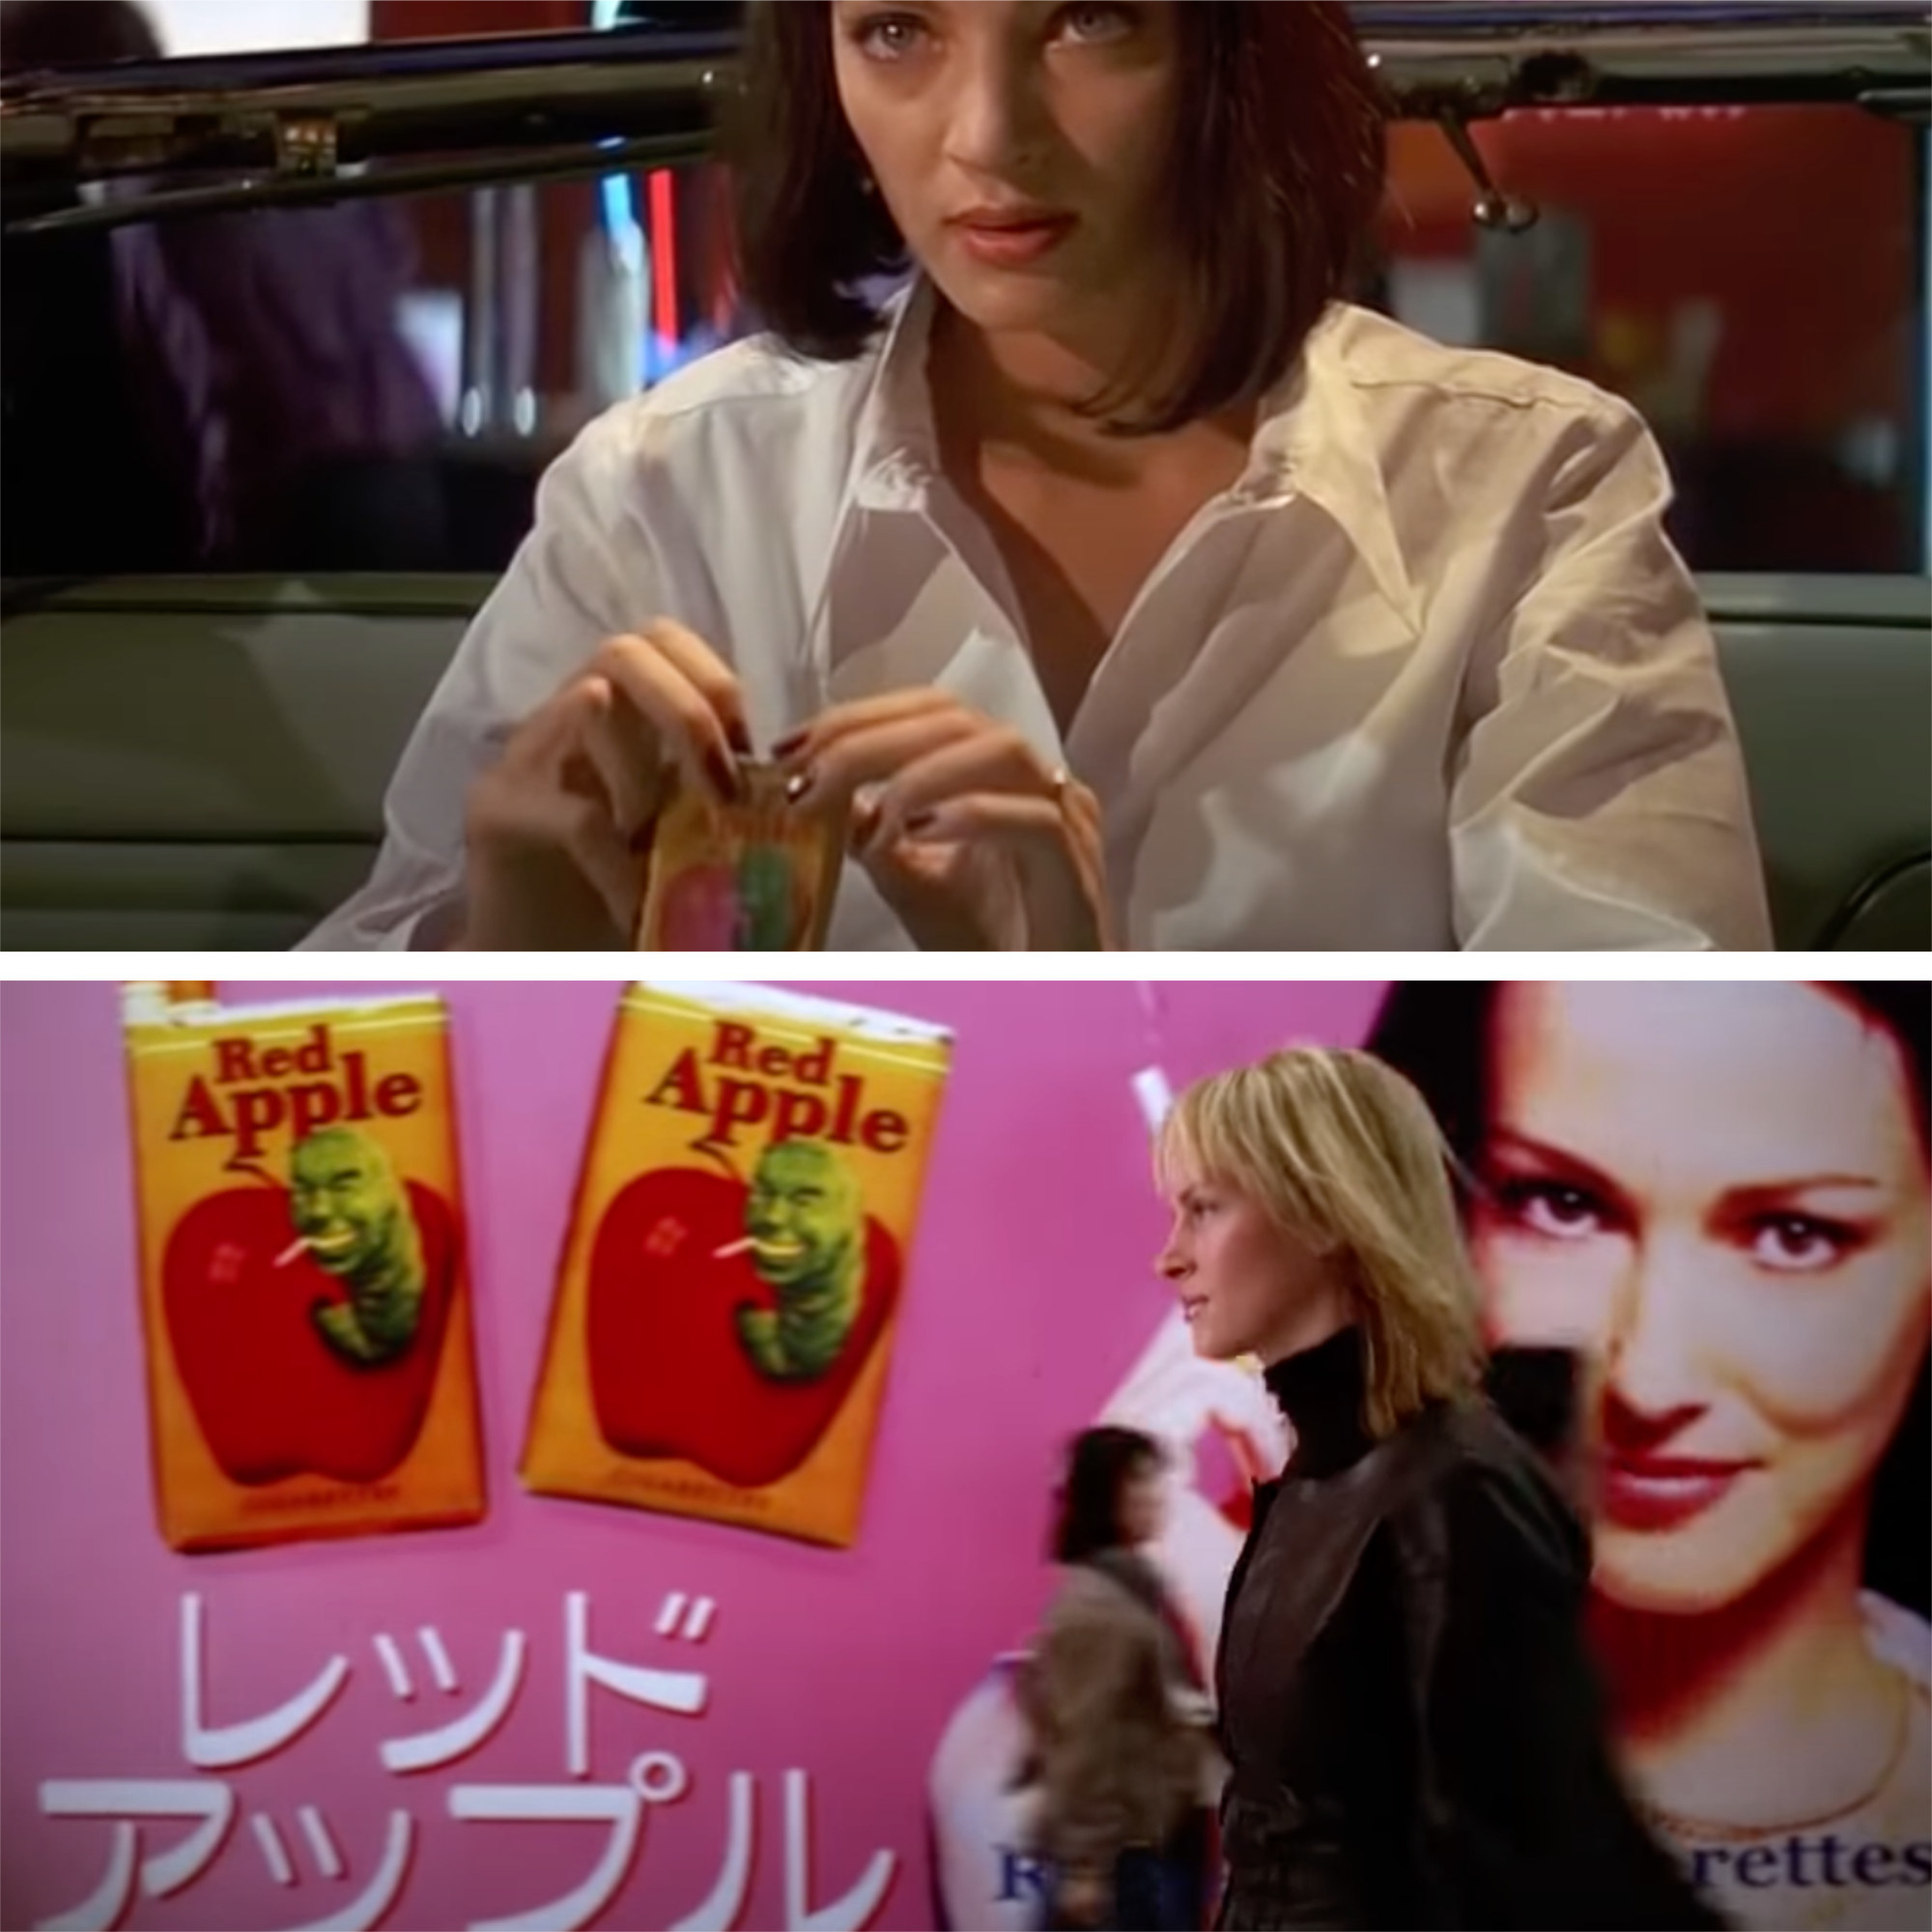 Pulp Fiction and Kill Bill red apple cigarettes link